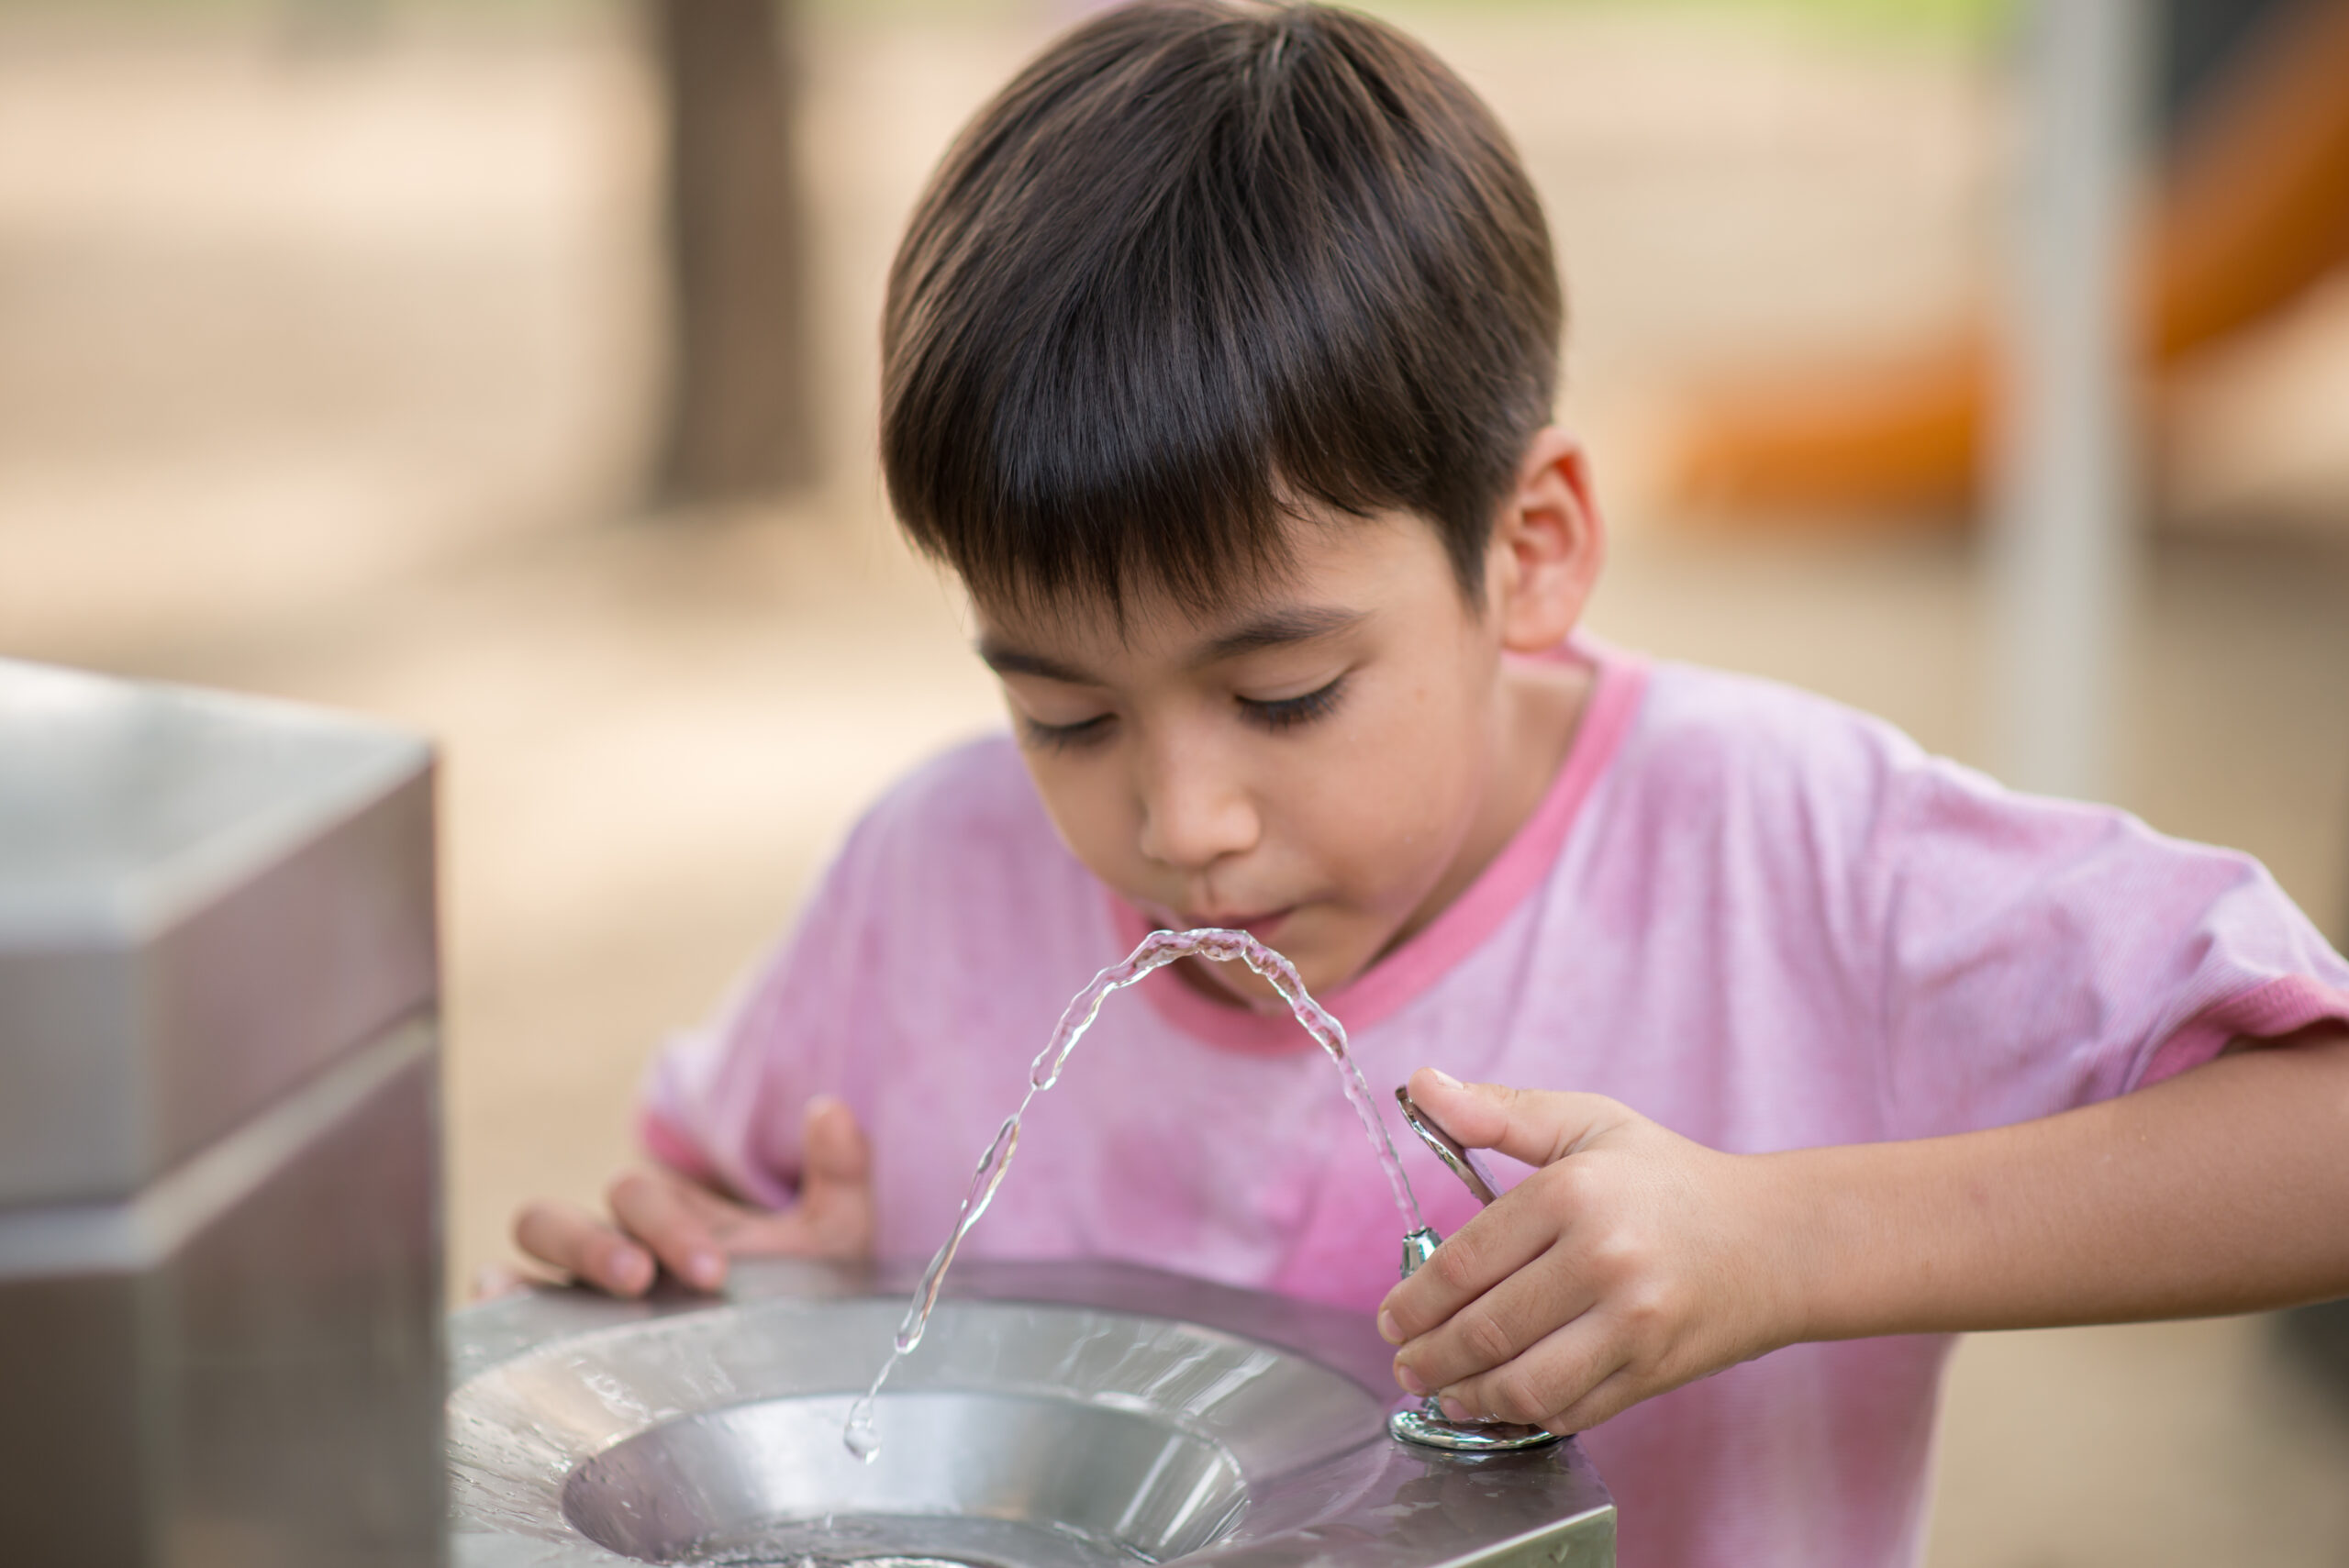 Is Your Child's School Testing for Lead in the Water?